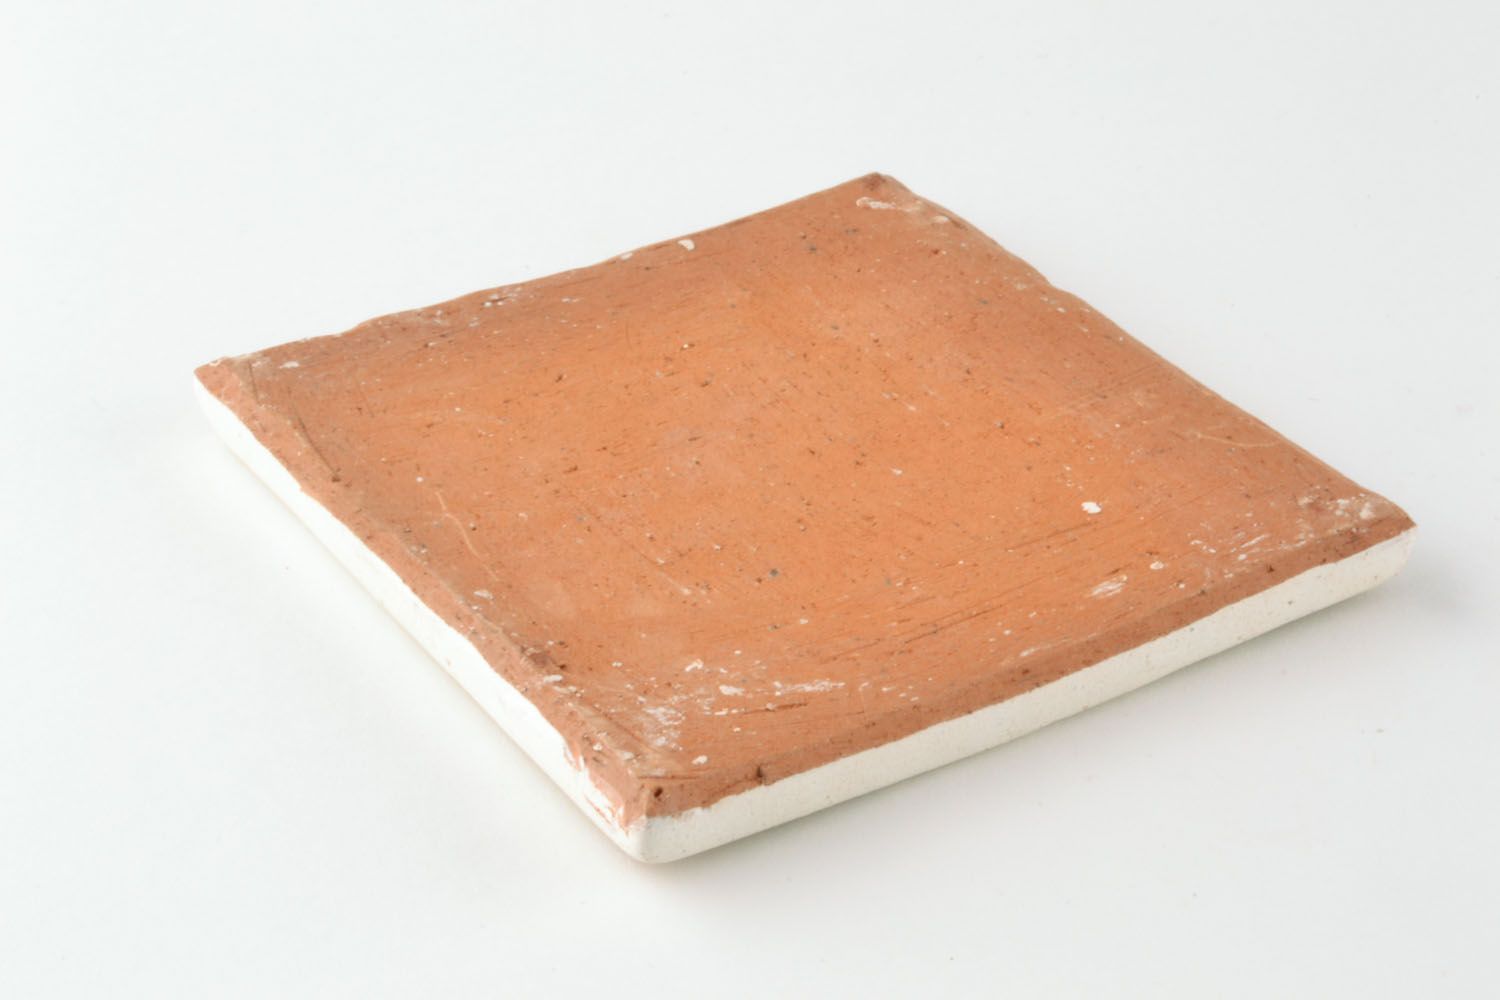 Tile for furnace or fireplace decor photo 2